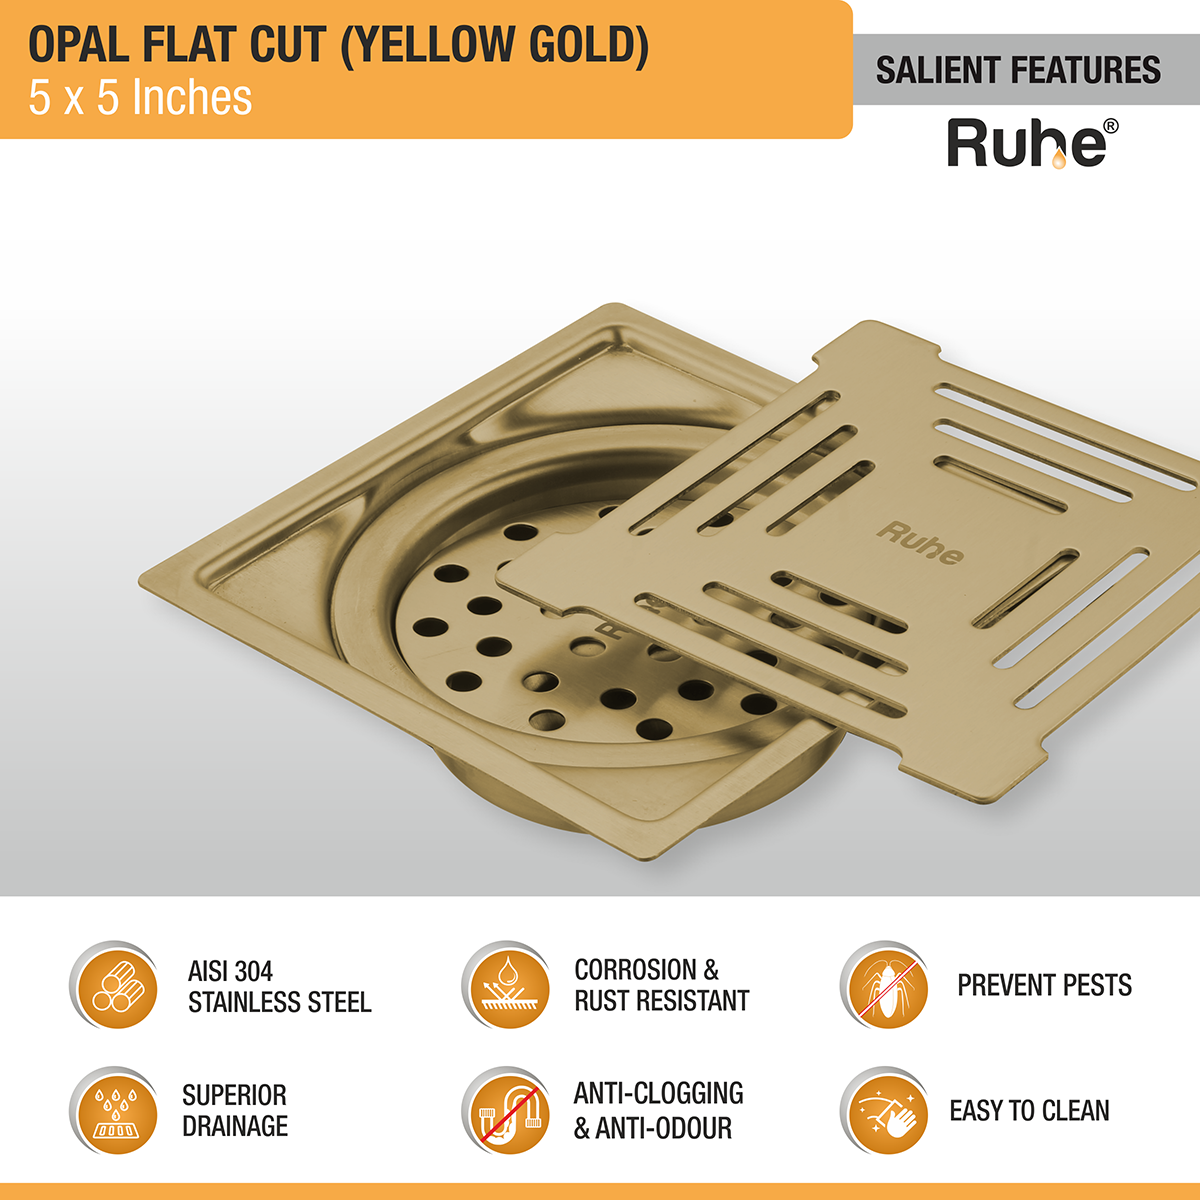 Opal Square Flat Cut Floor Drain in Yellow Gold PVD Coating (5 x 5 Inches) features